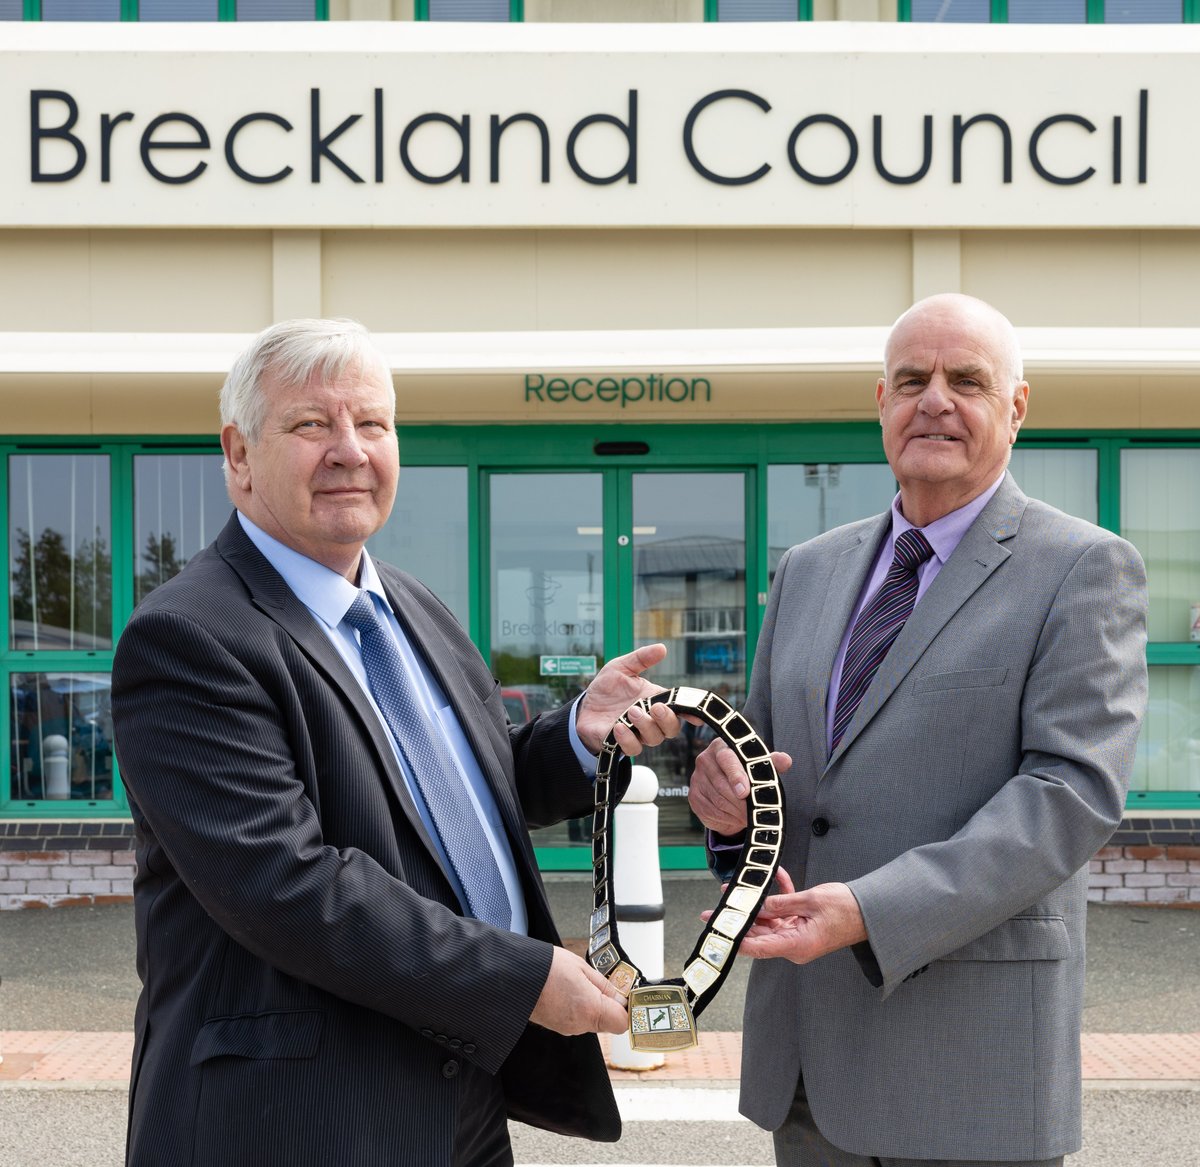 At our Breckland Council AGM today Ward members  selected our 2023/2024 Chairman and Vice Chairman  - read more at breckland.gov.uk/article/21044/…